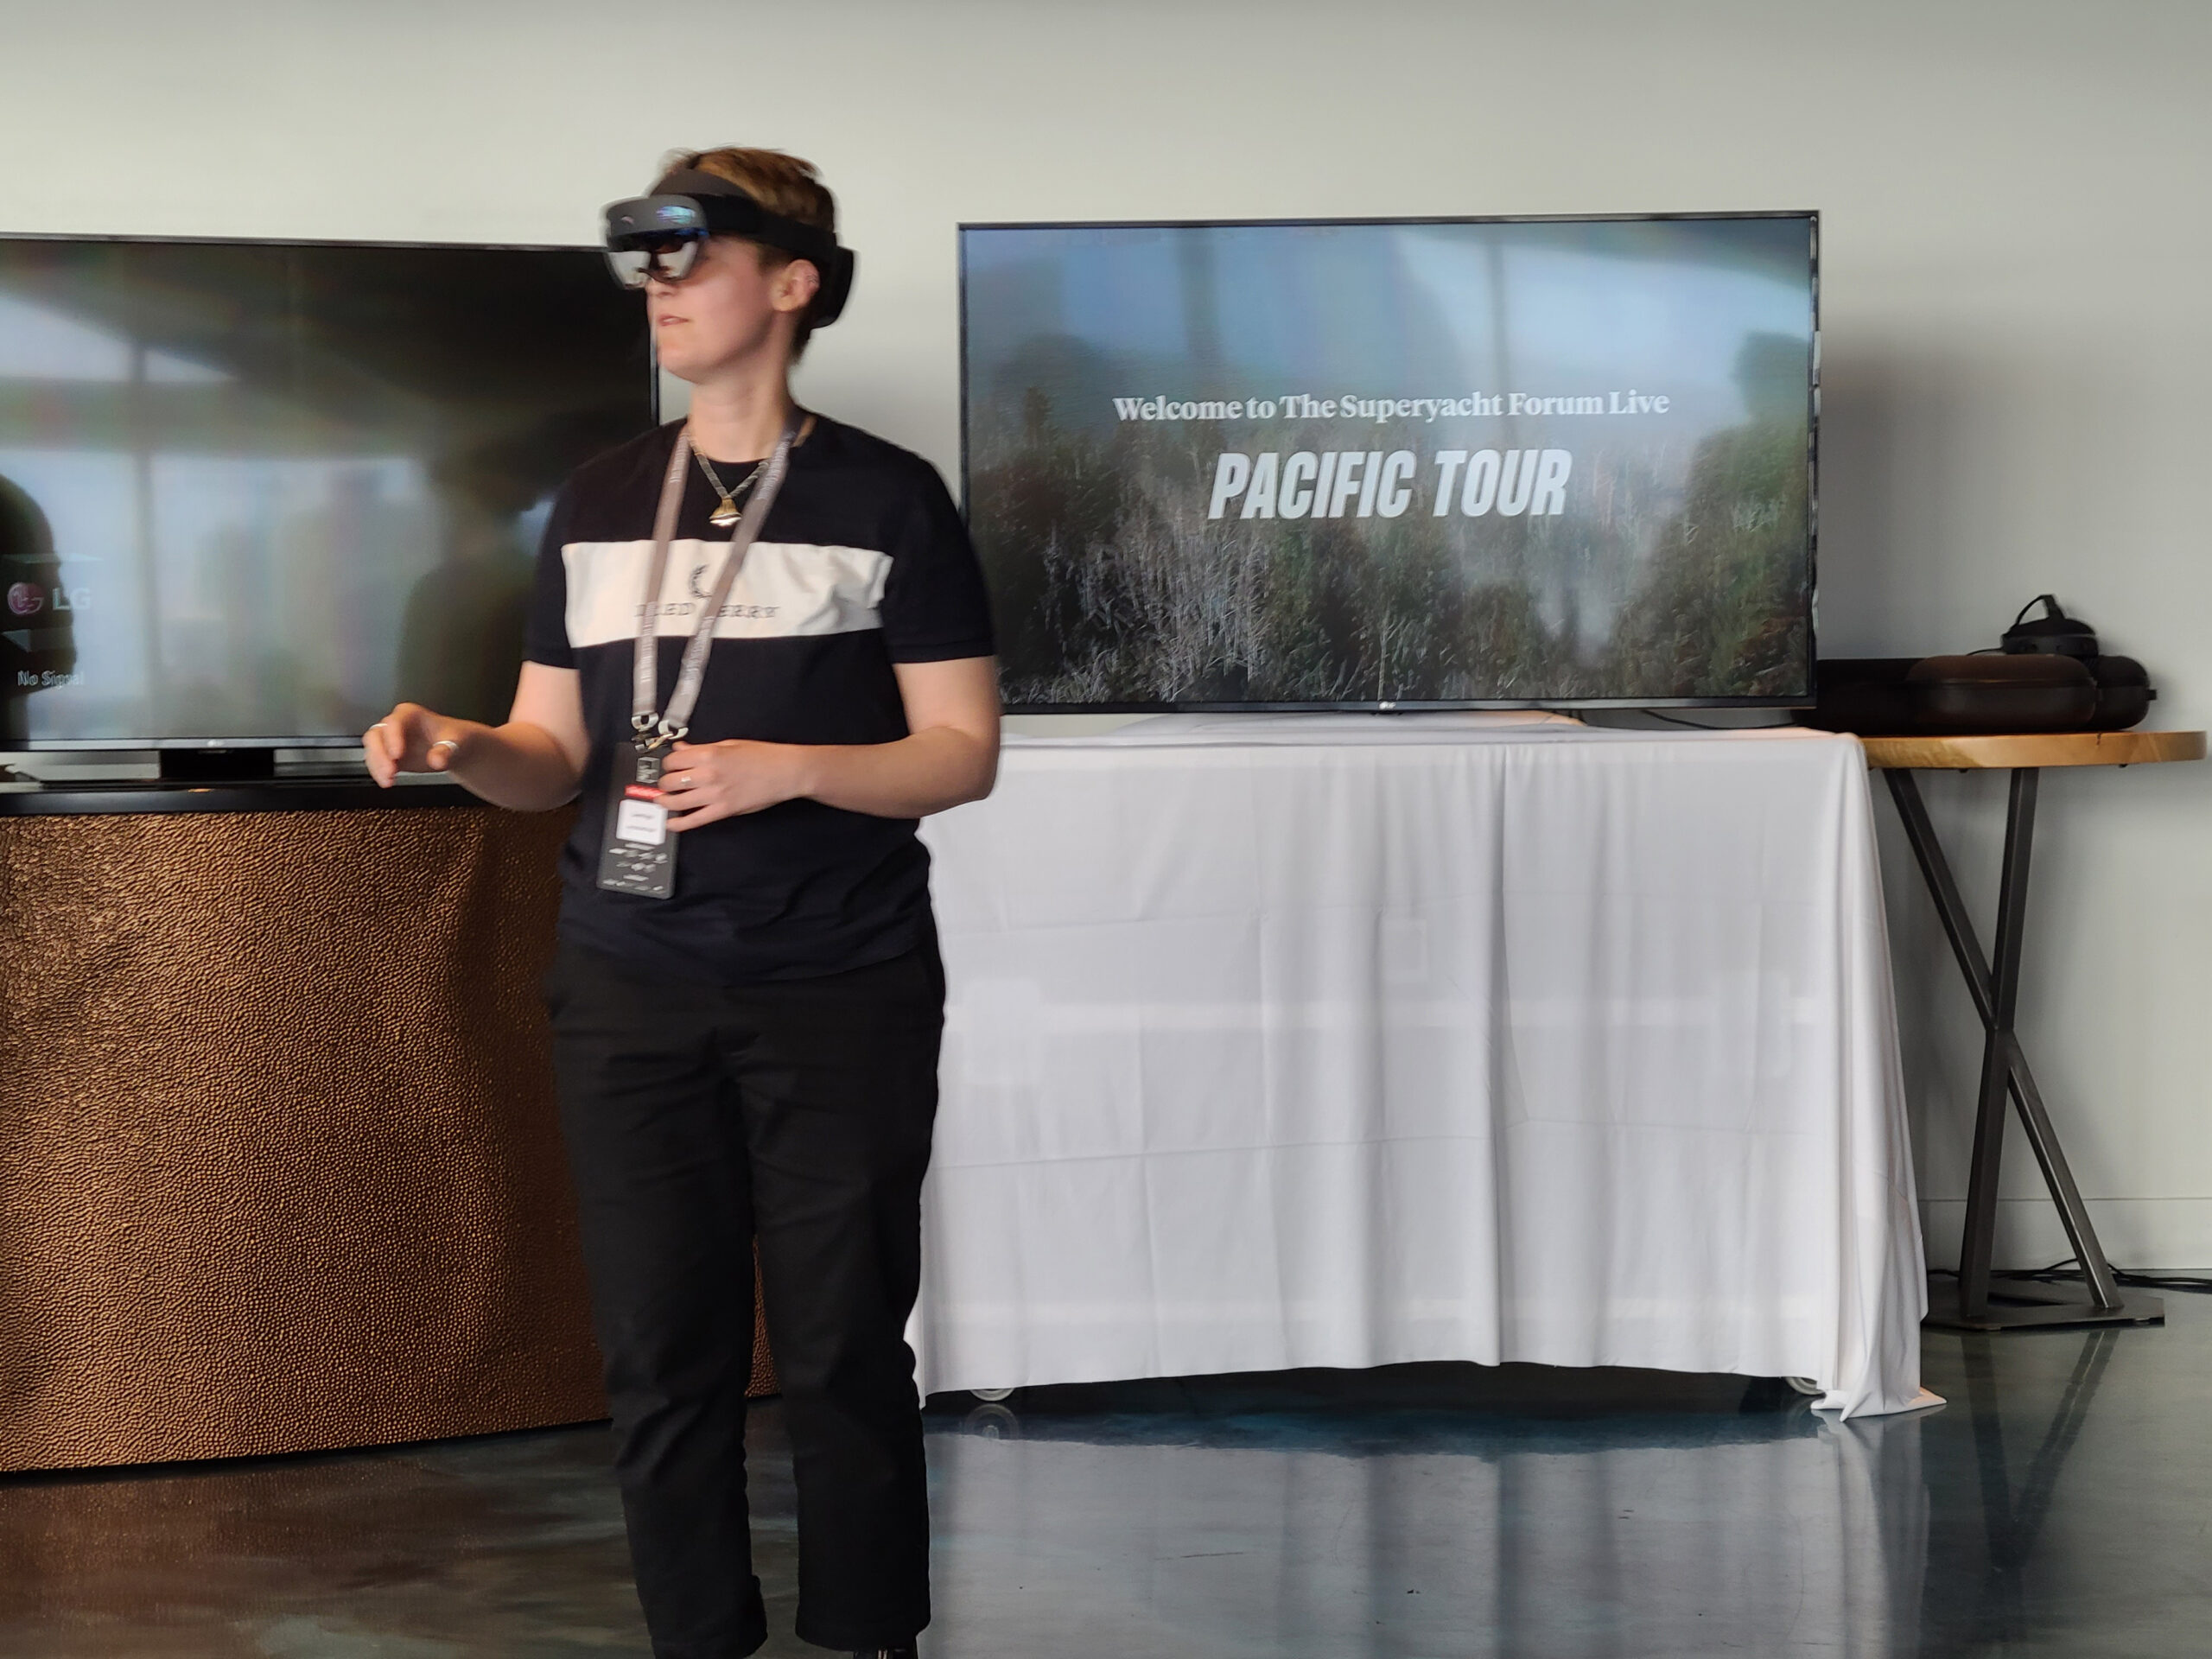 Ron Holland Design Engineer Laura Fuge experiences VR engine room at the Superyacht Forum, Victoria BC